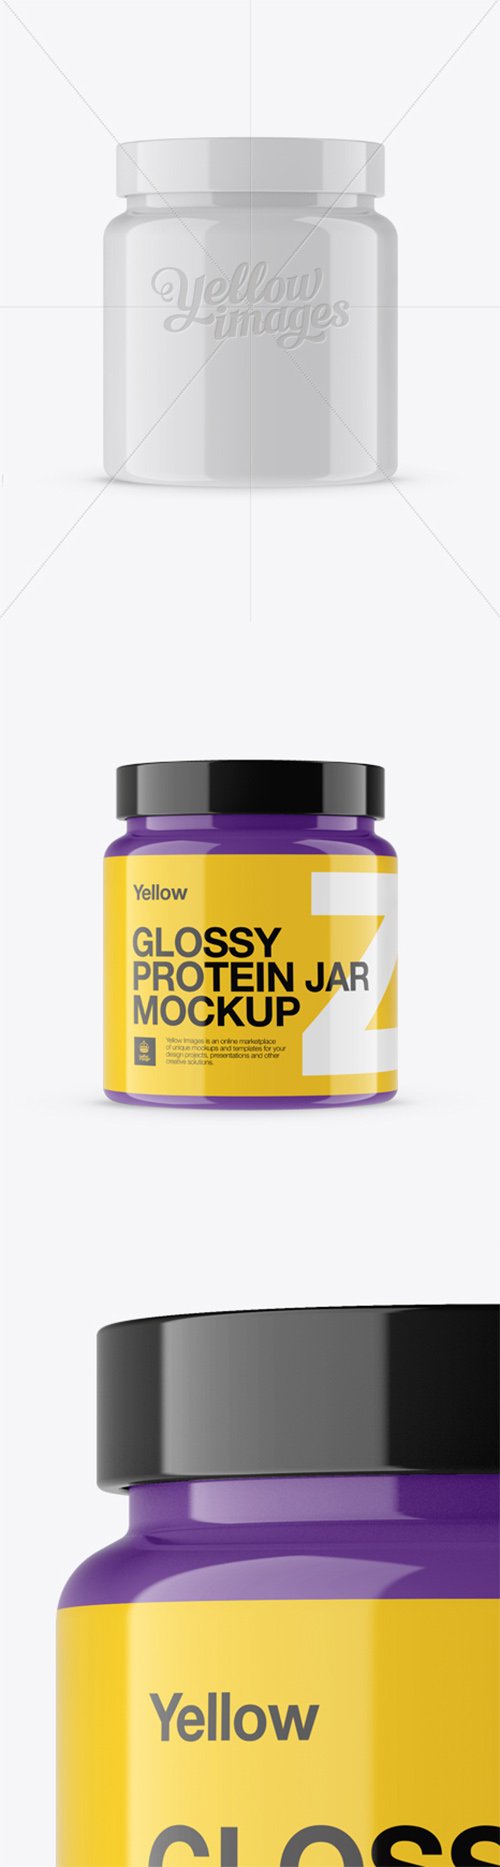 Glossy Protein Jar Mockup - Front View 13770 TIF